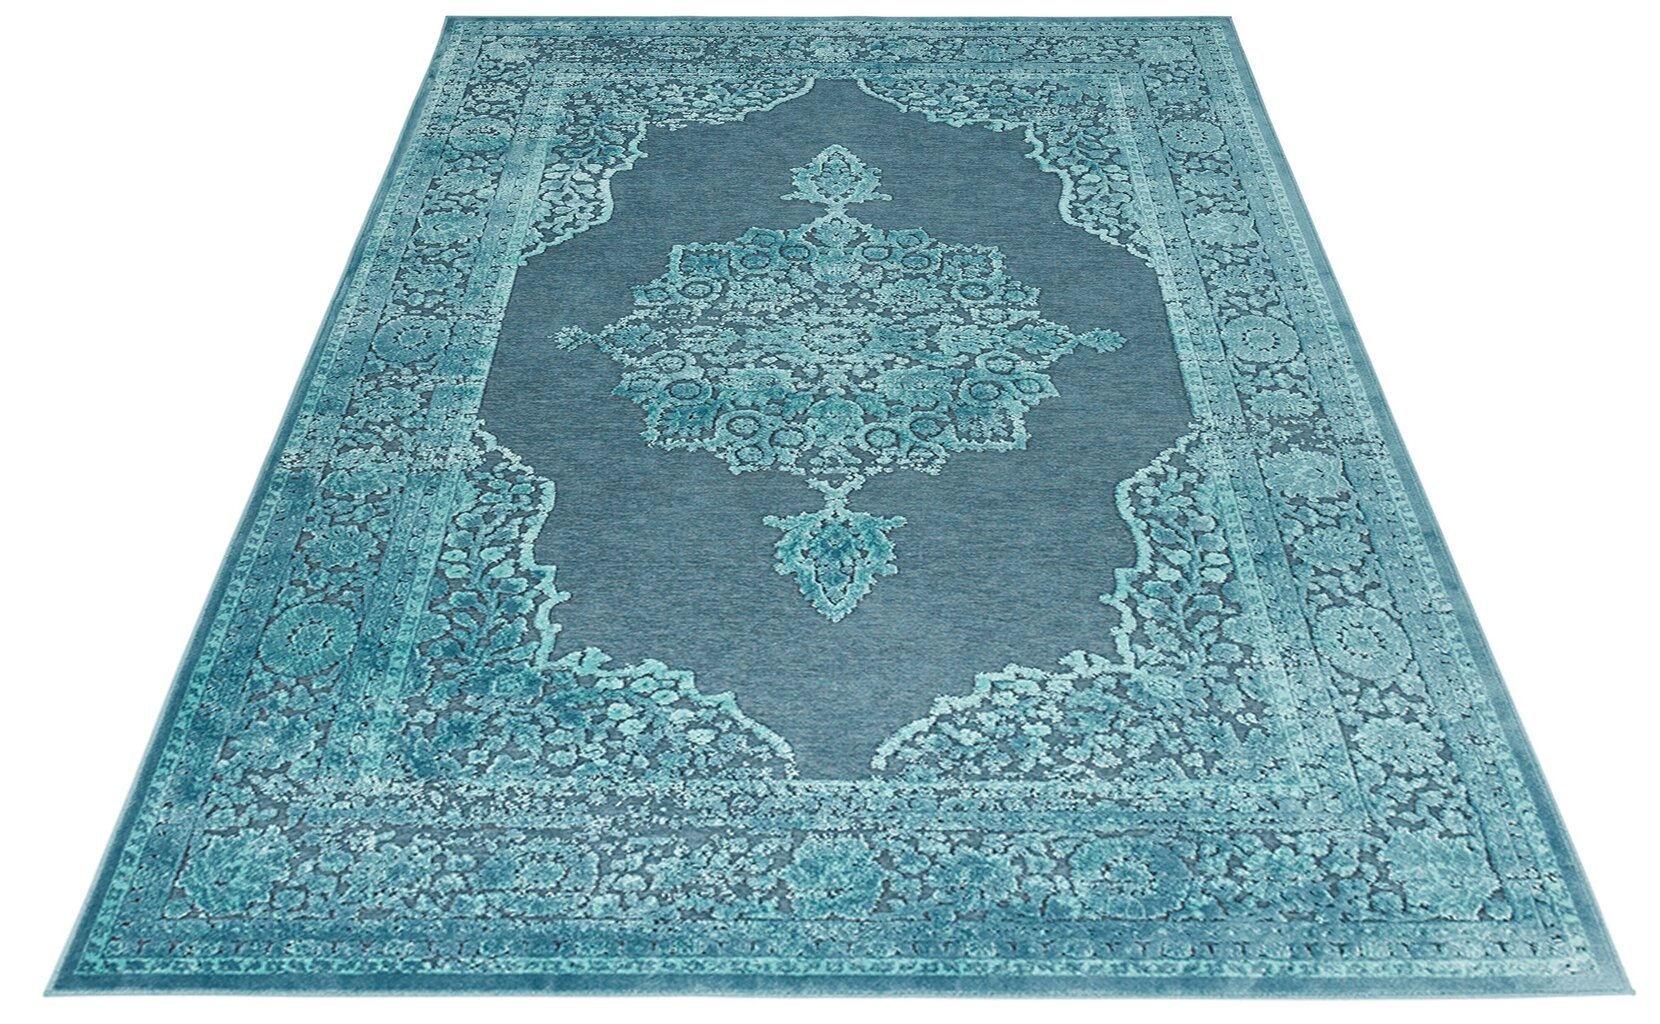 Matto Mint Rugs Willow, 200x300 cm hinta 